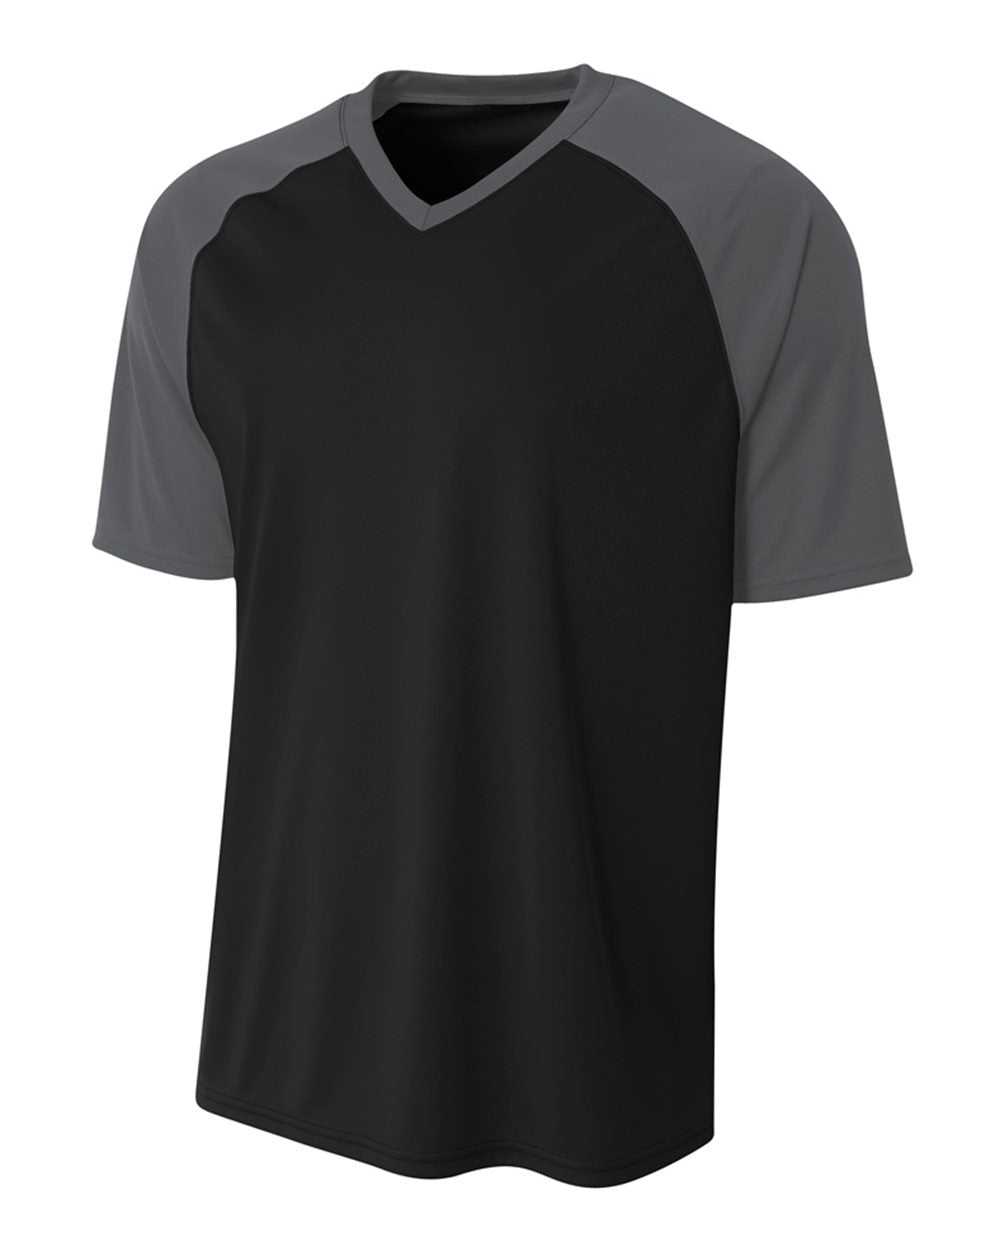 A4 NB3373 Youth Strike Jersey - Black Graphite - HIT a Double